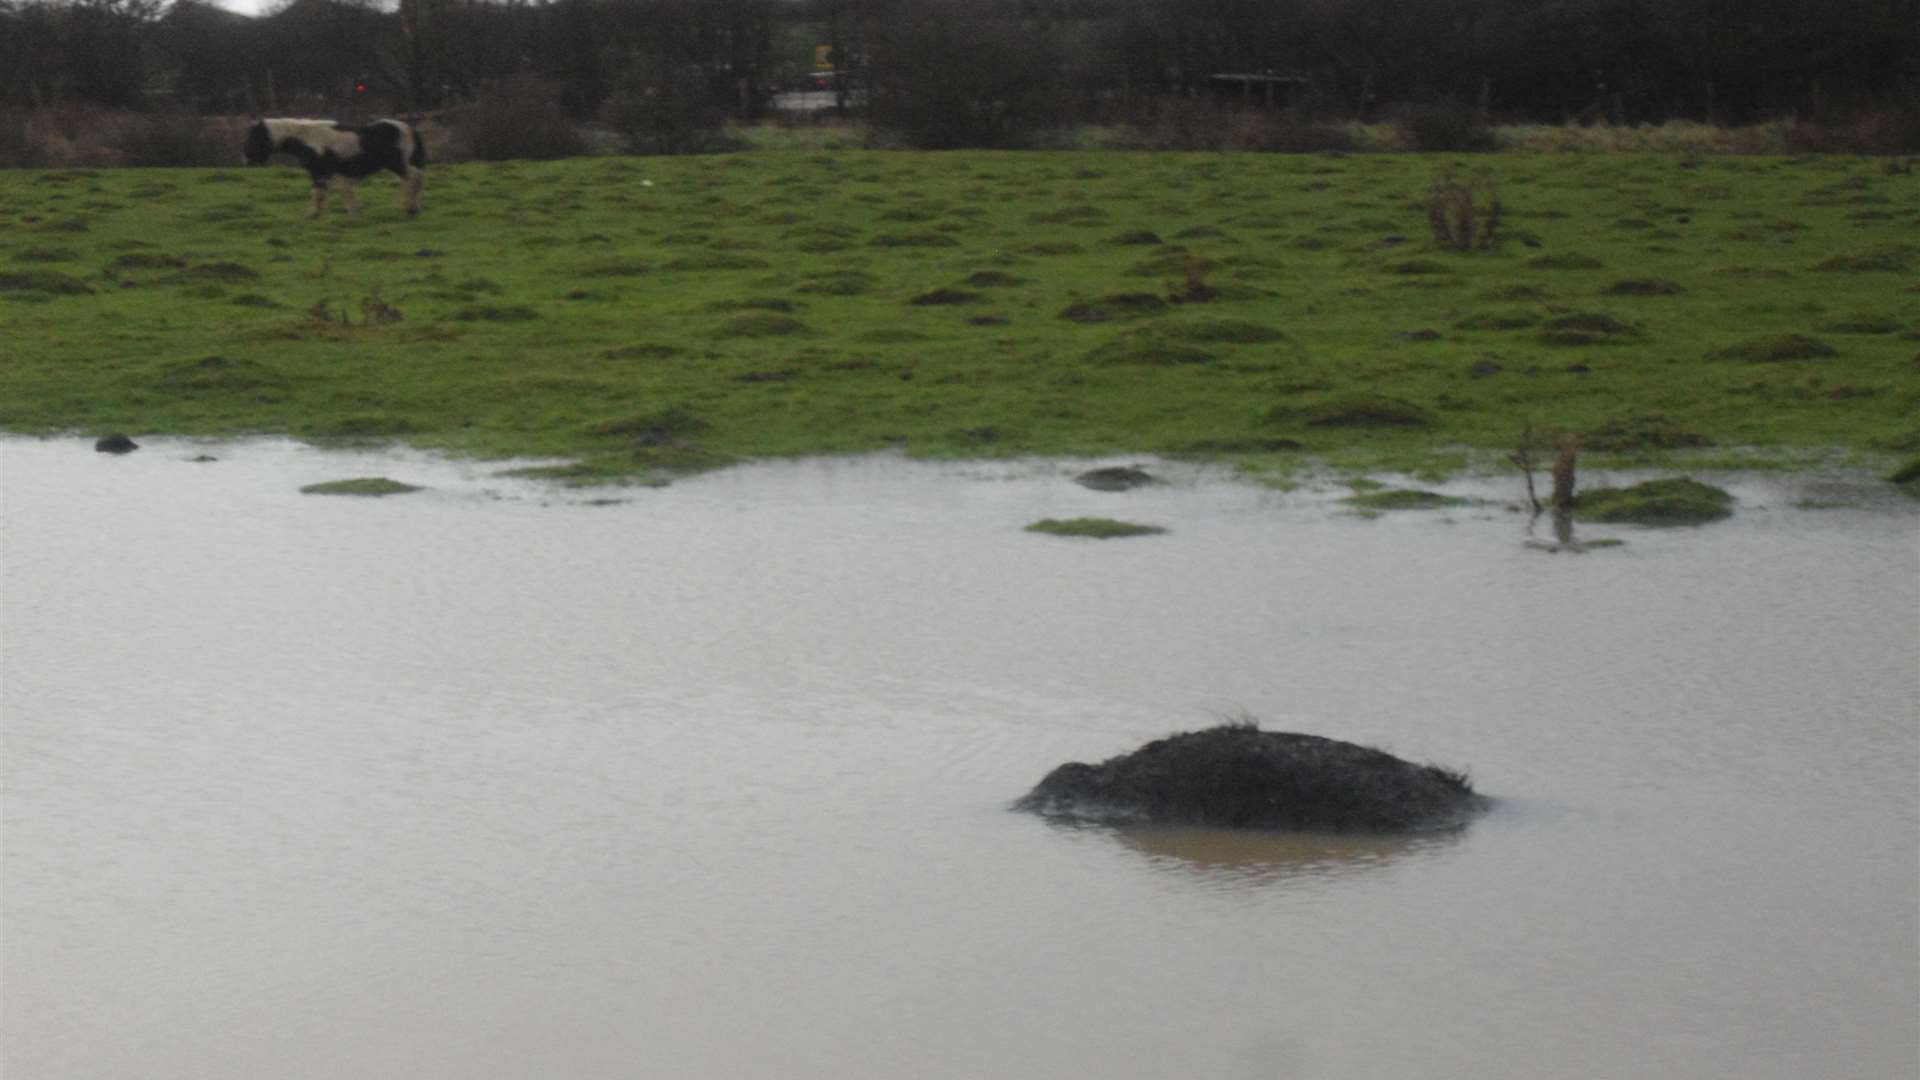 There are other horses in the waterlogged field